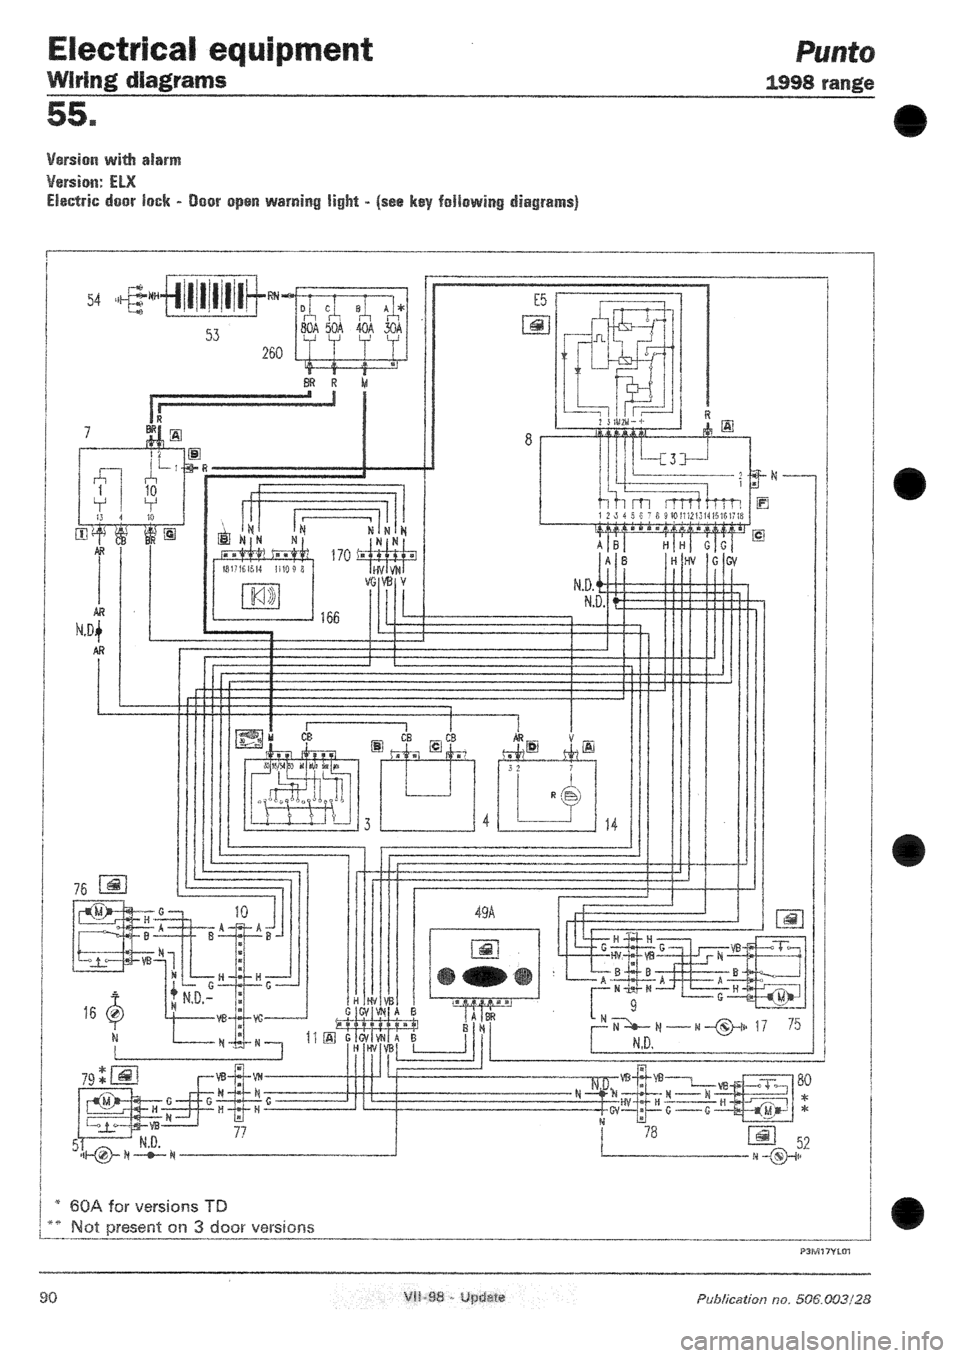 FIAT PUNTO 1998 176 / 1.G Wiring Diagrams Owners Manual 